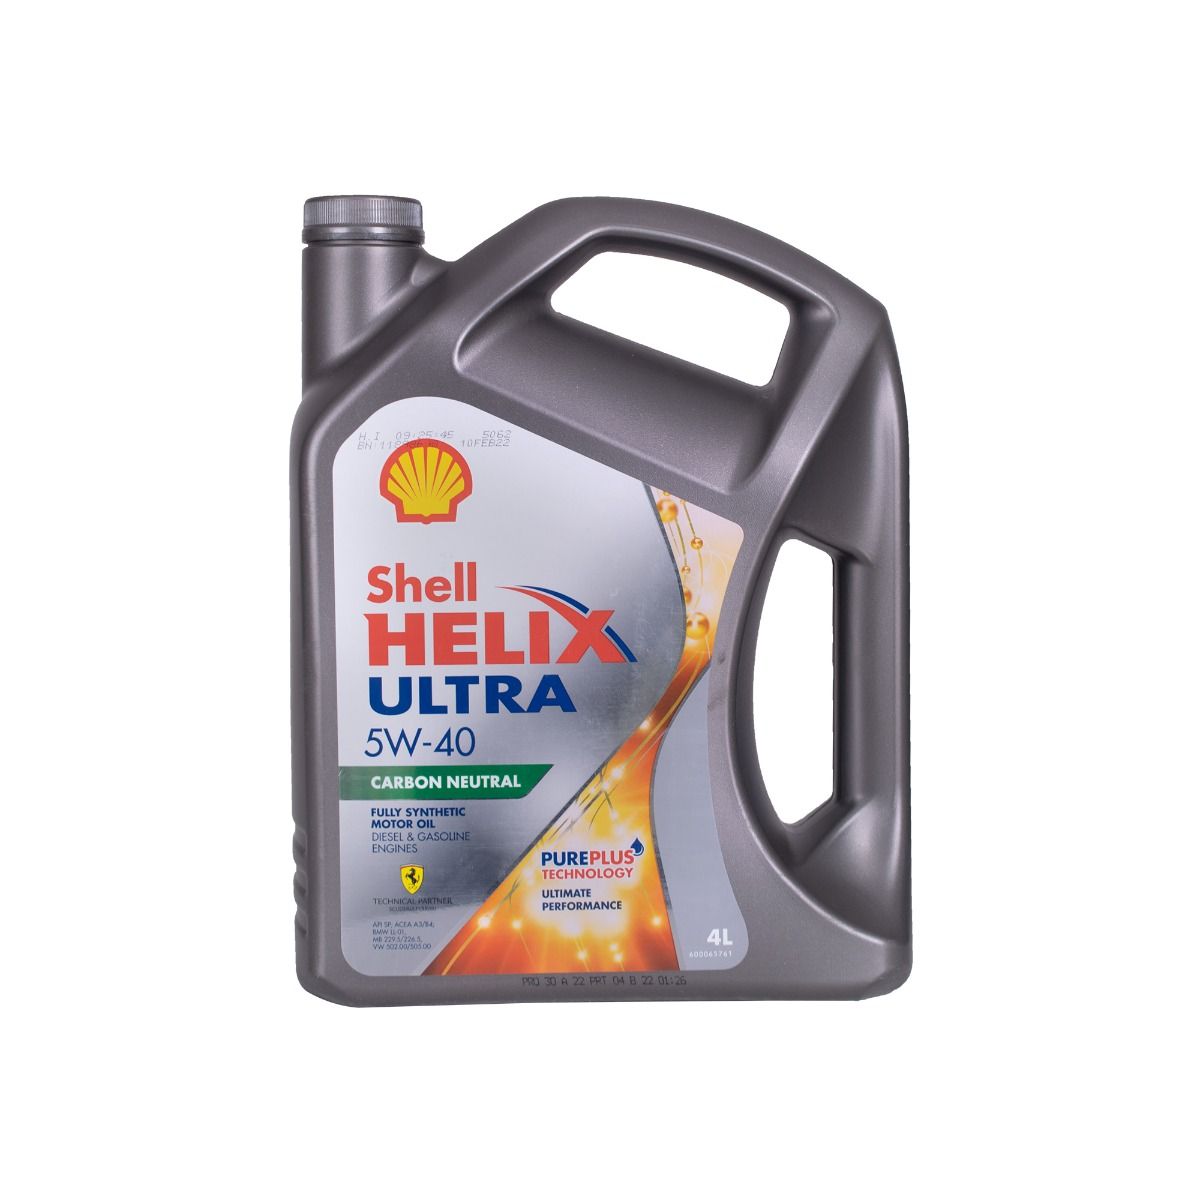 Shell Helix Ultra Motor Oil 5W-40 Liters | lupon.gov.ph